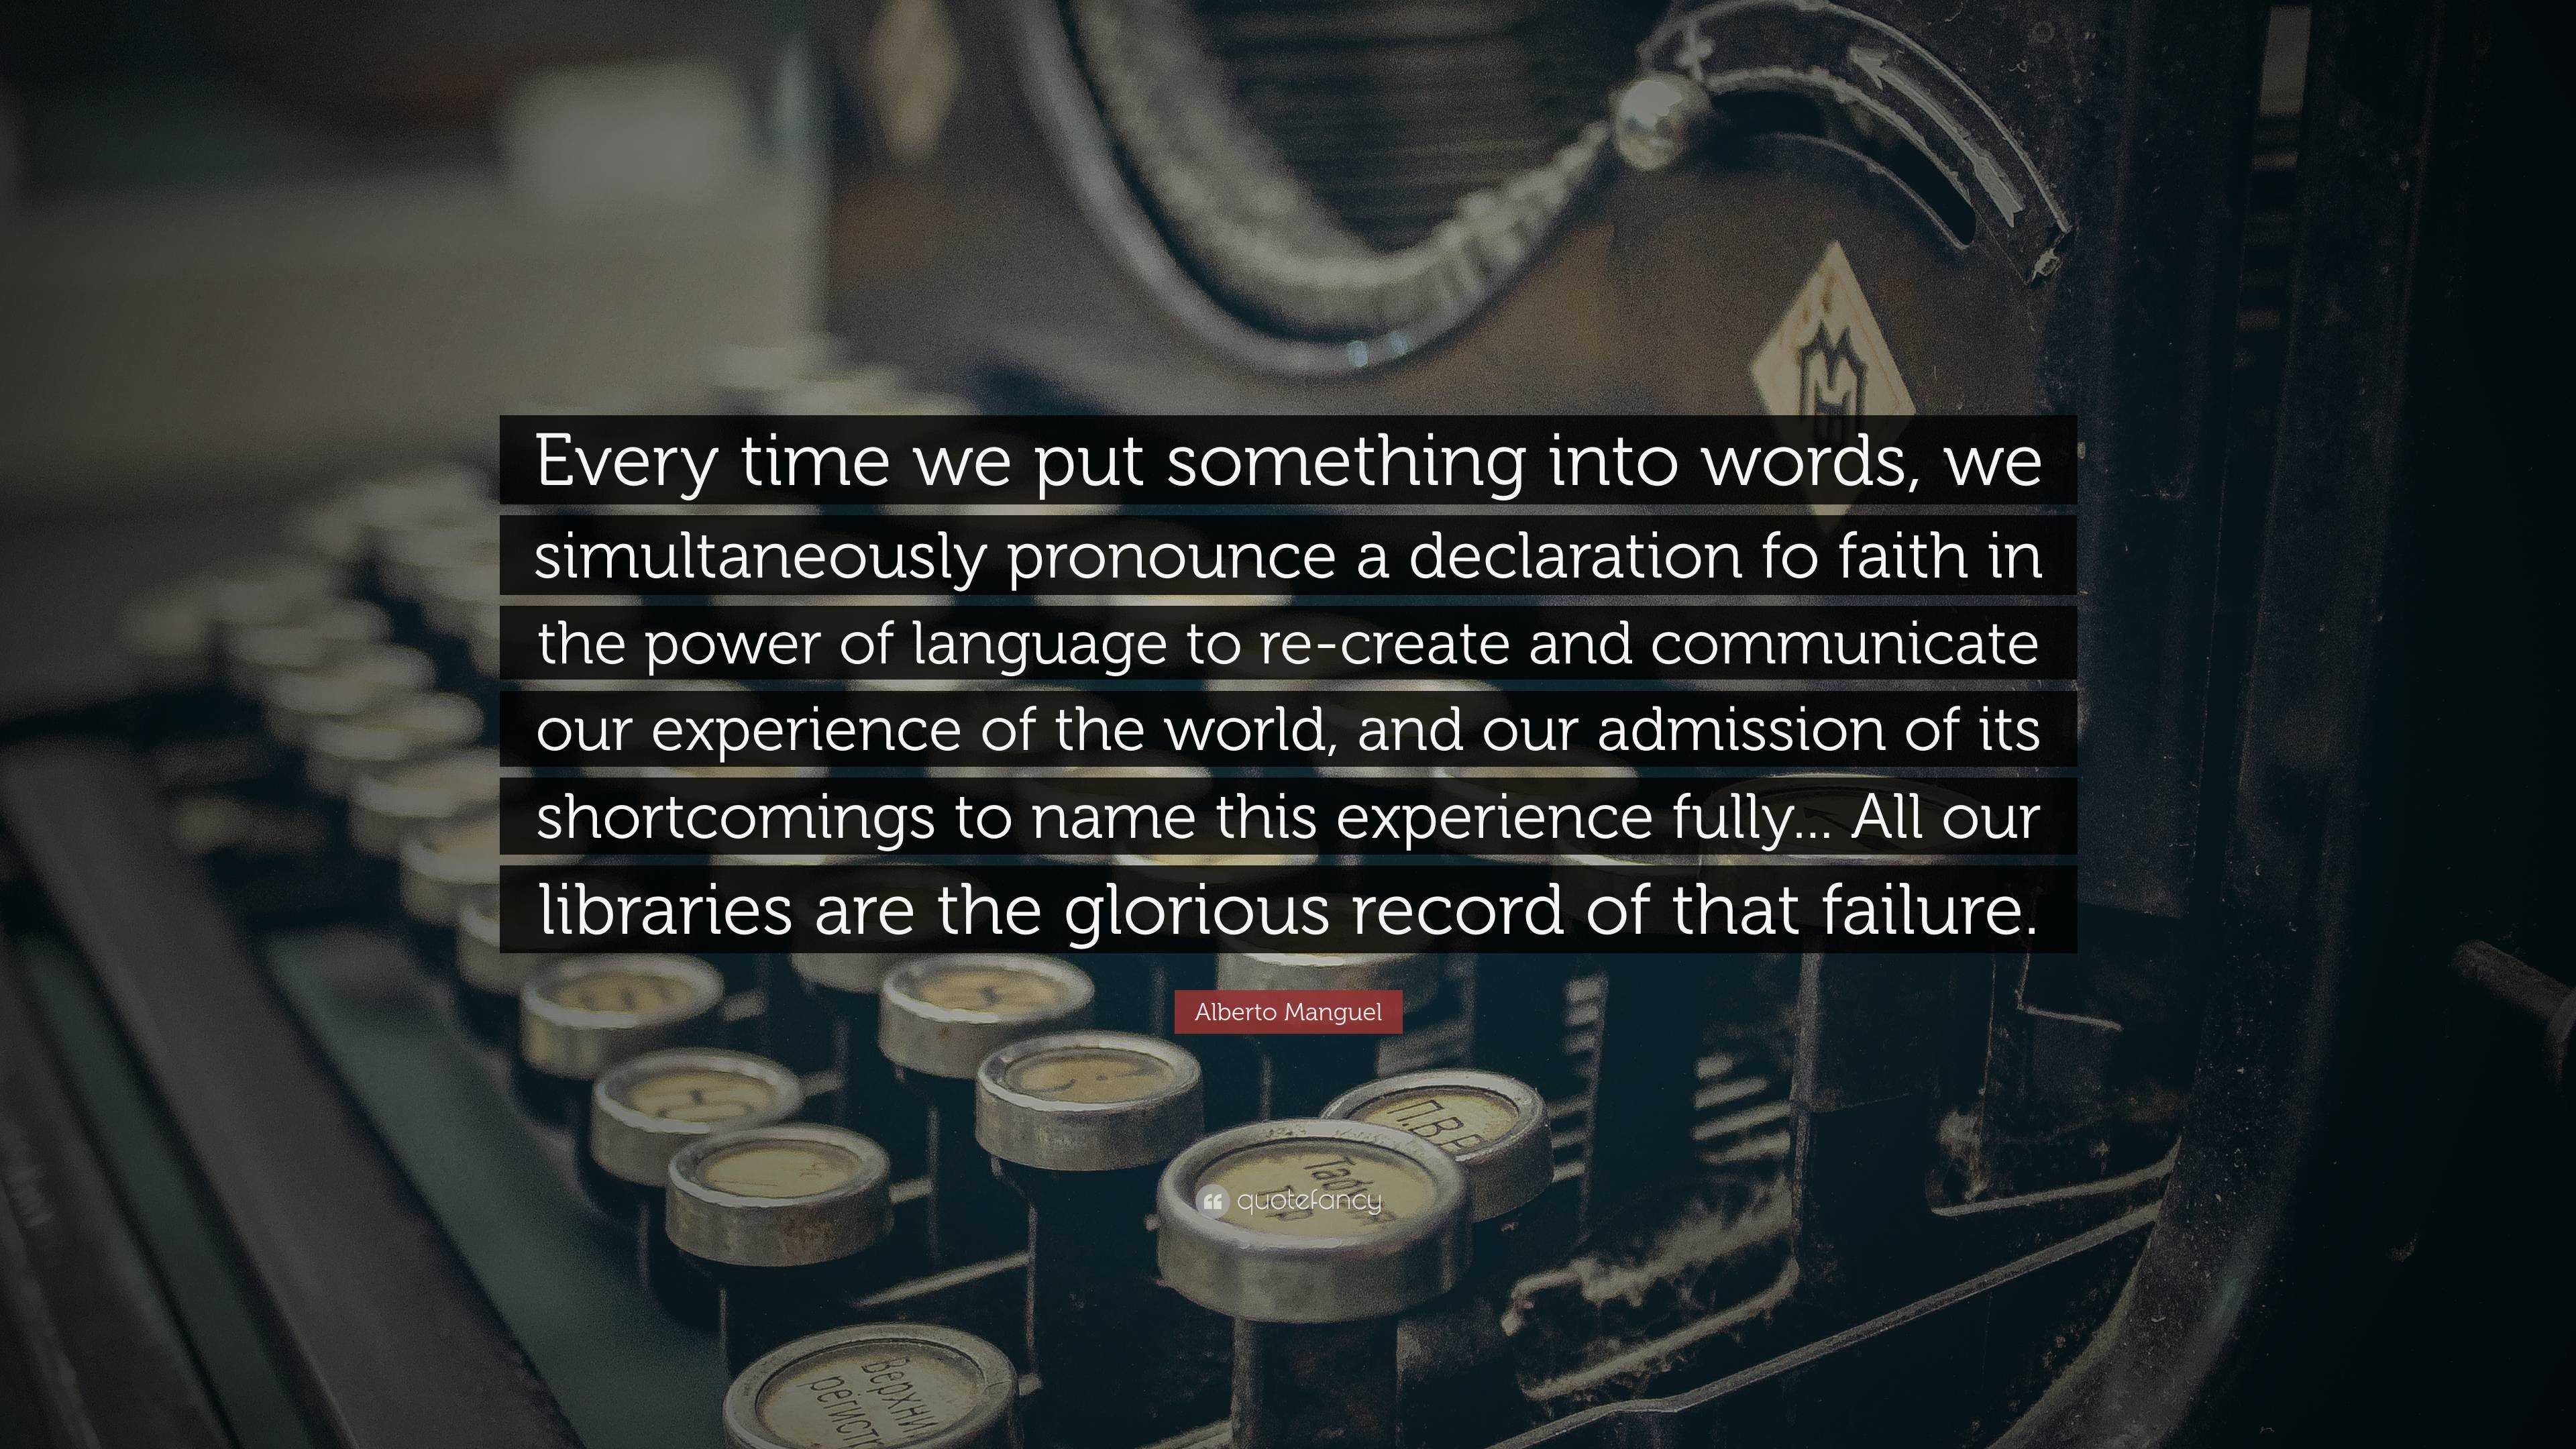 Alberto Manguel Quote: “Every time we put something into words, we